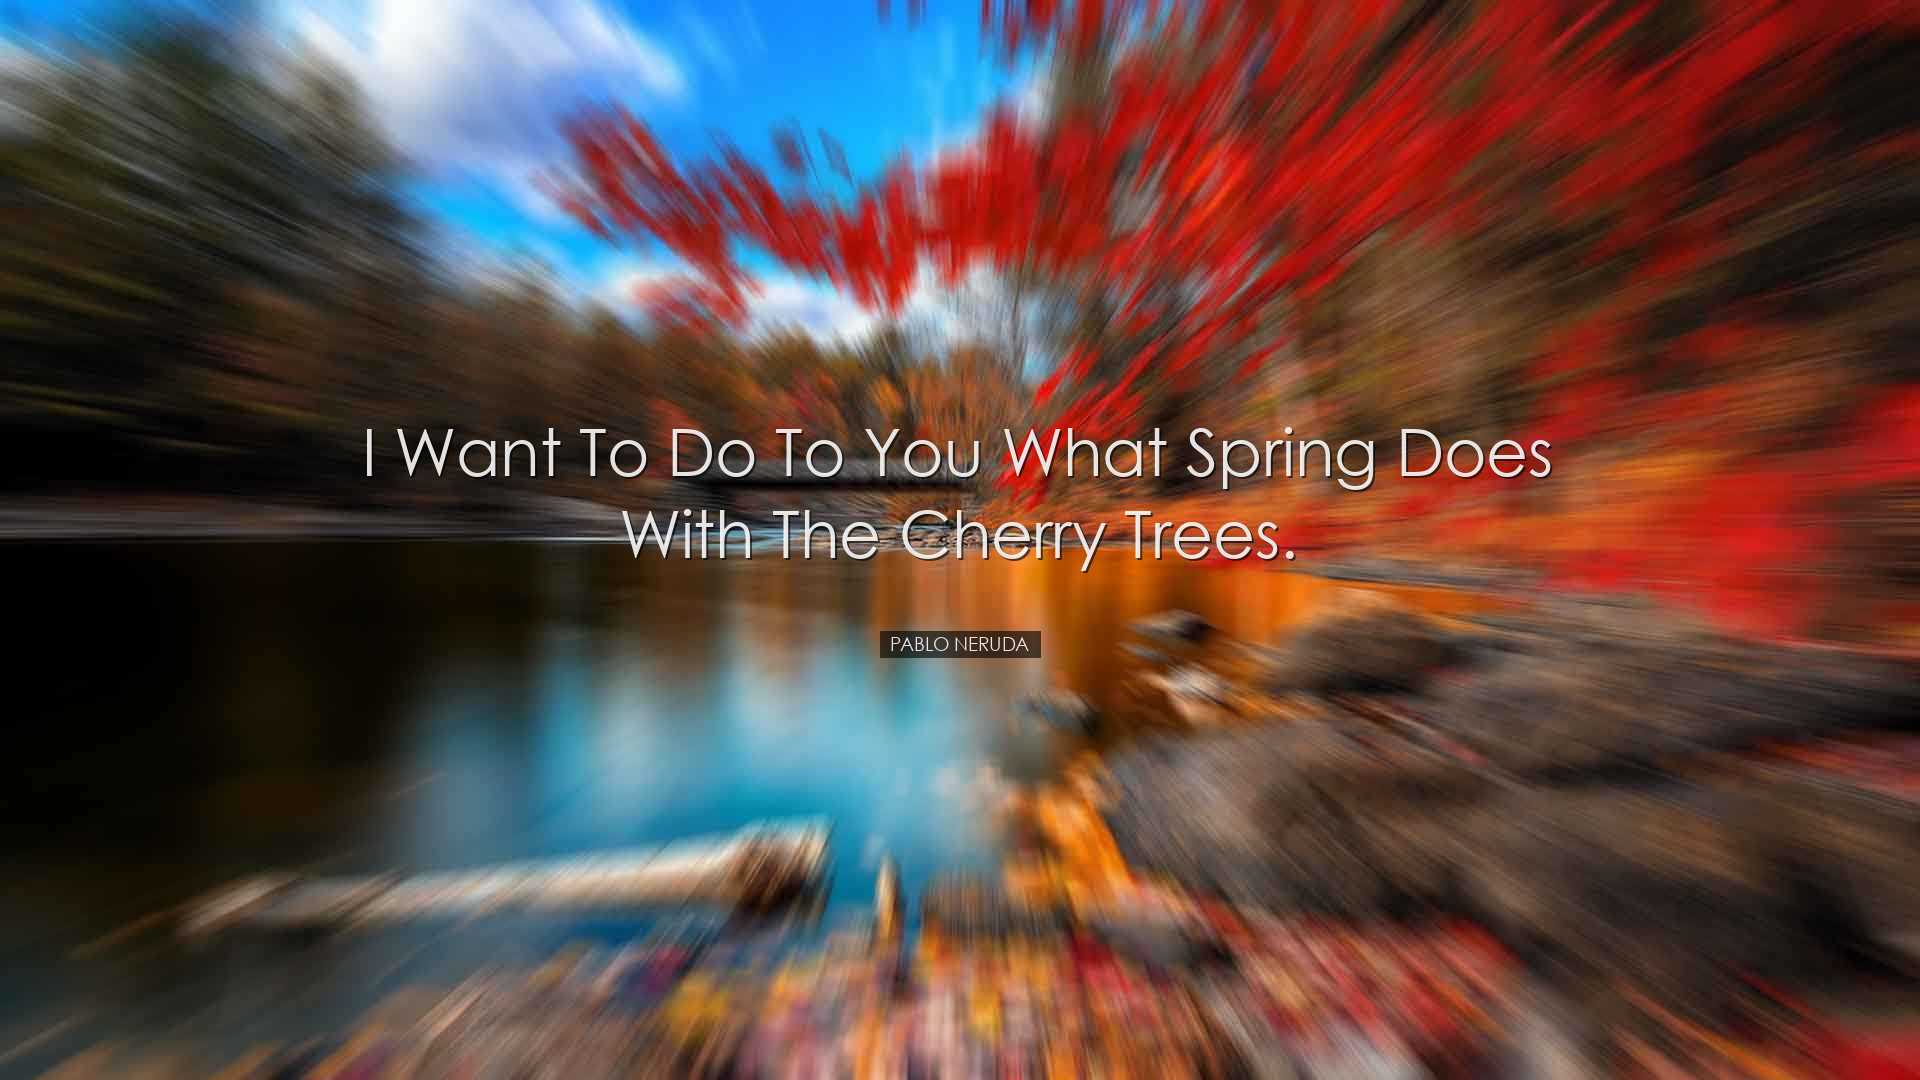 I want to do to you what spring does with the cherry trees. - Pabl